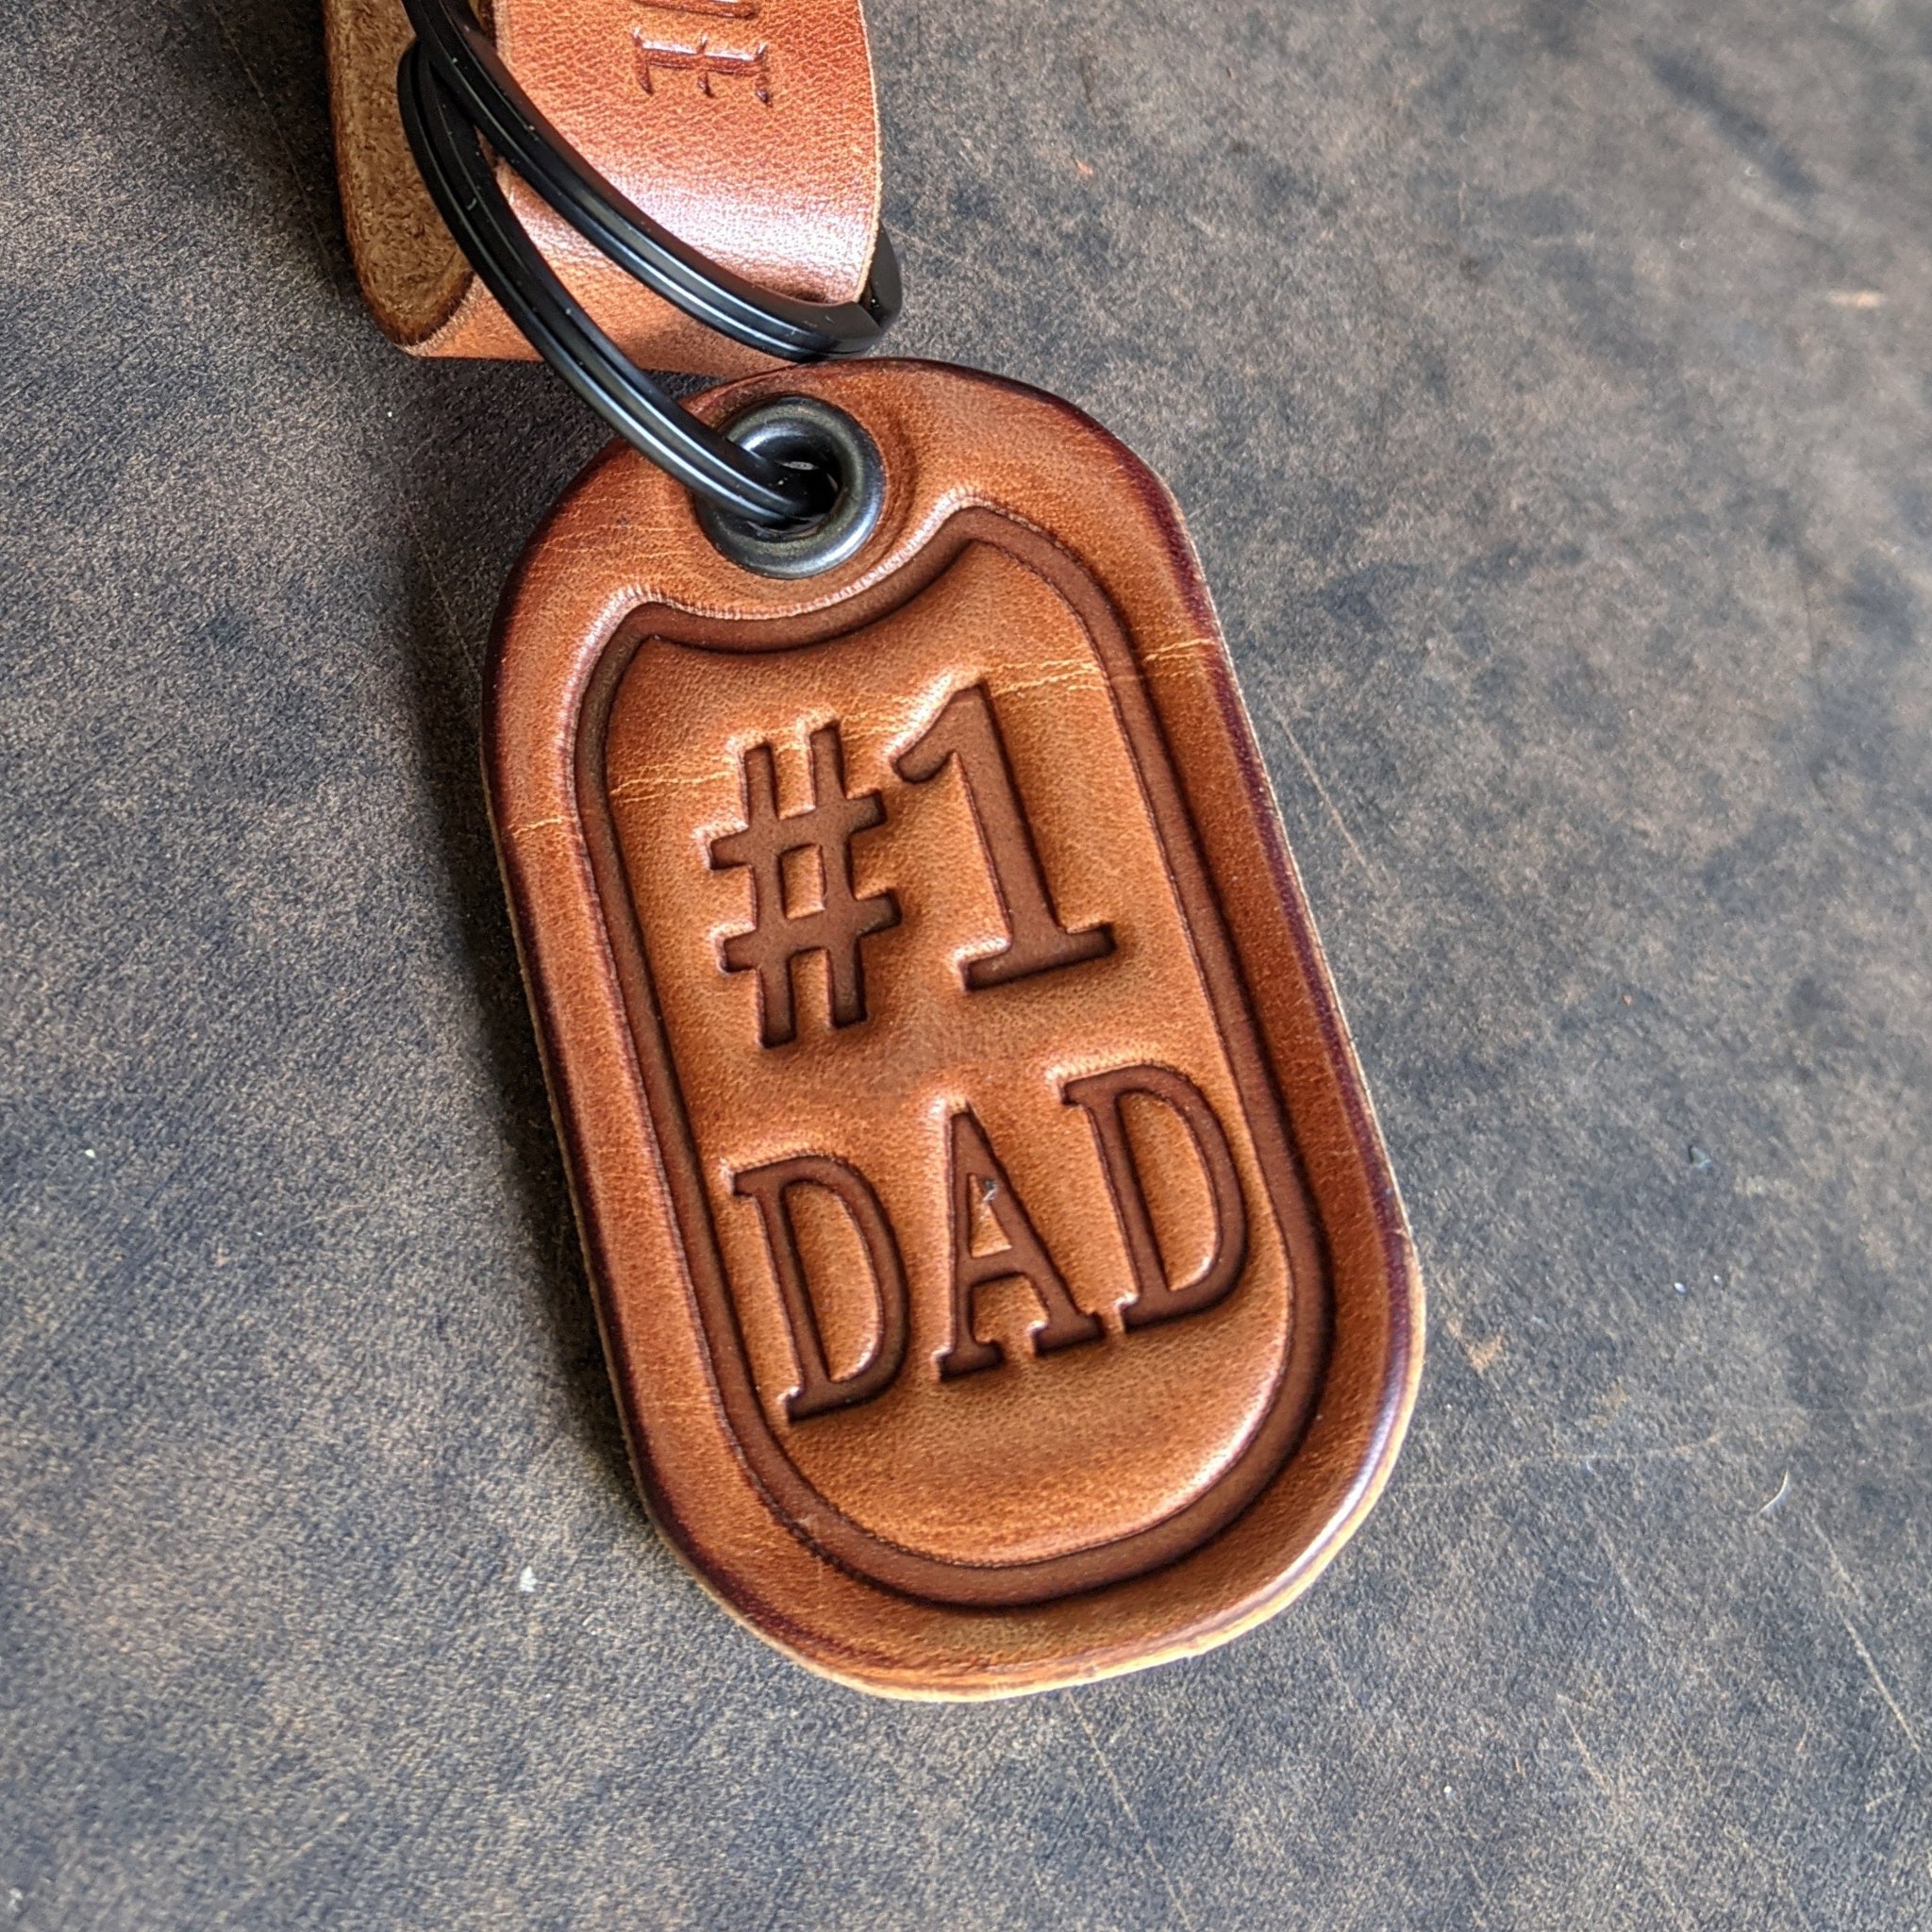 Popular Gifts For Dad